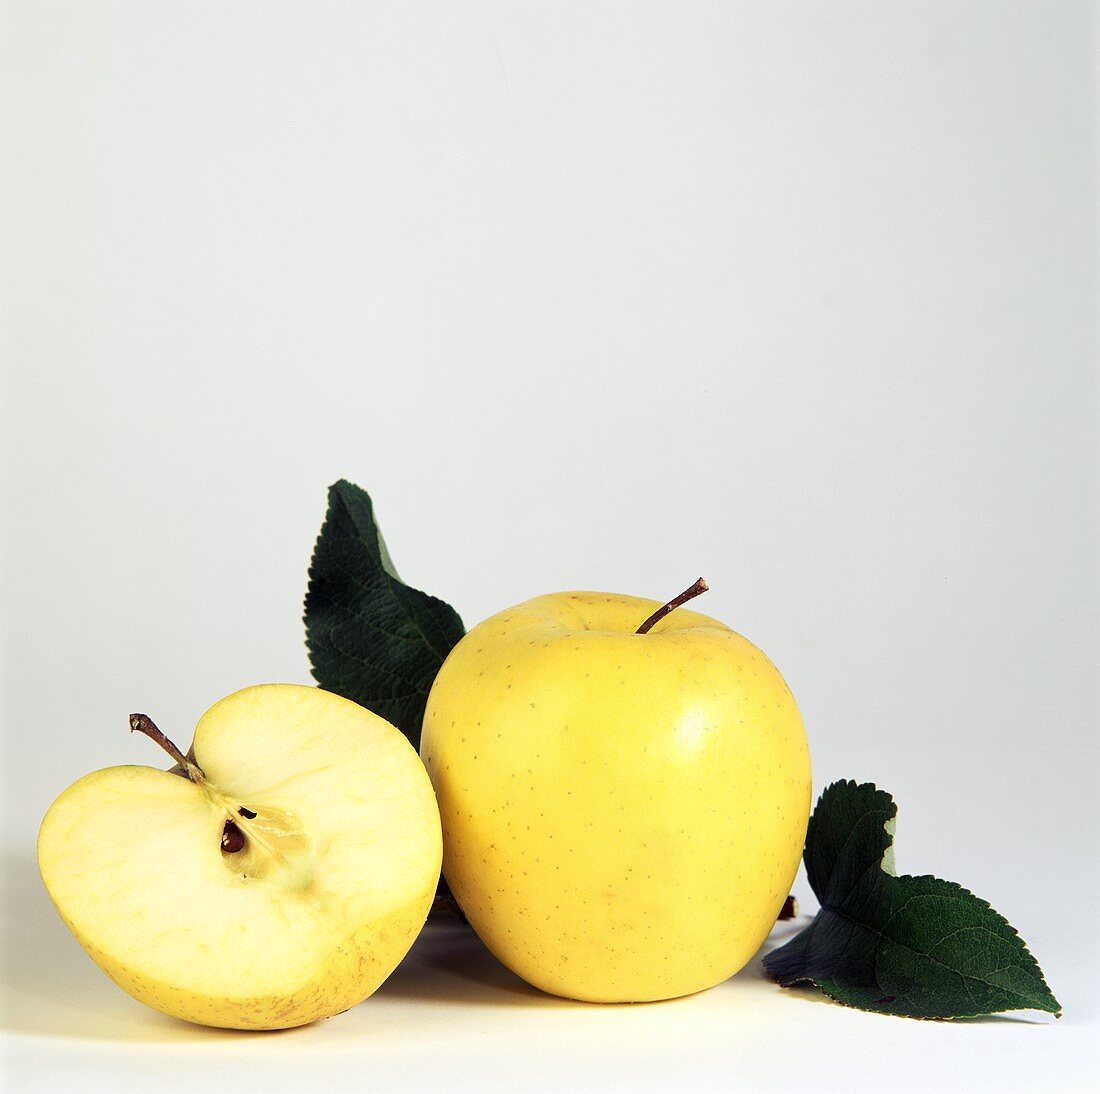 Two Golden Delicious; One Cut in Half